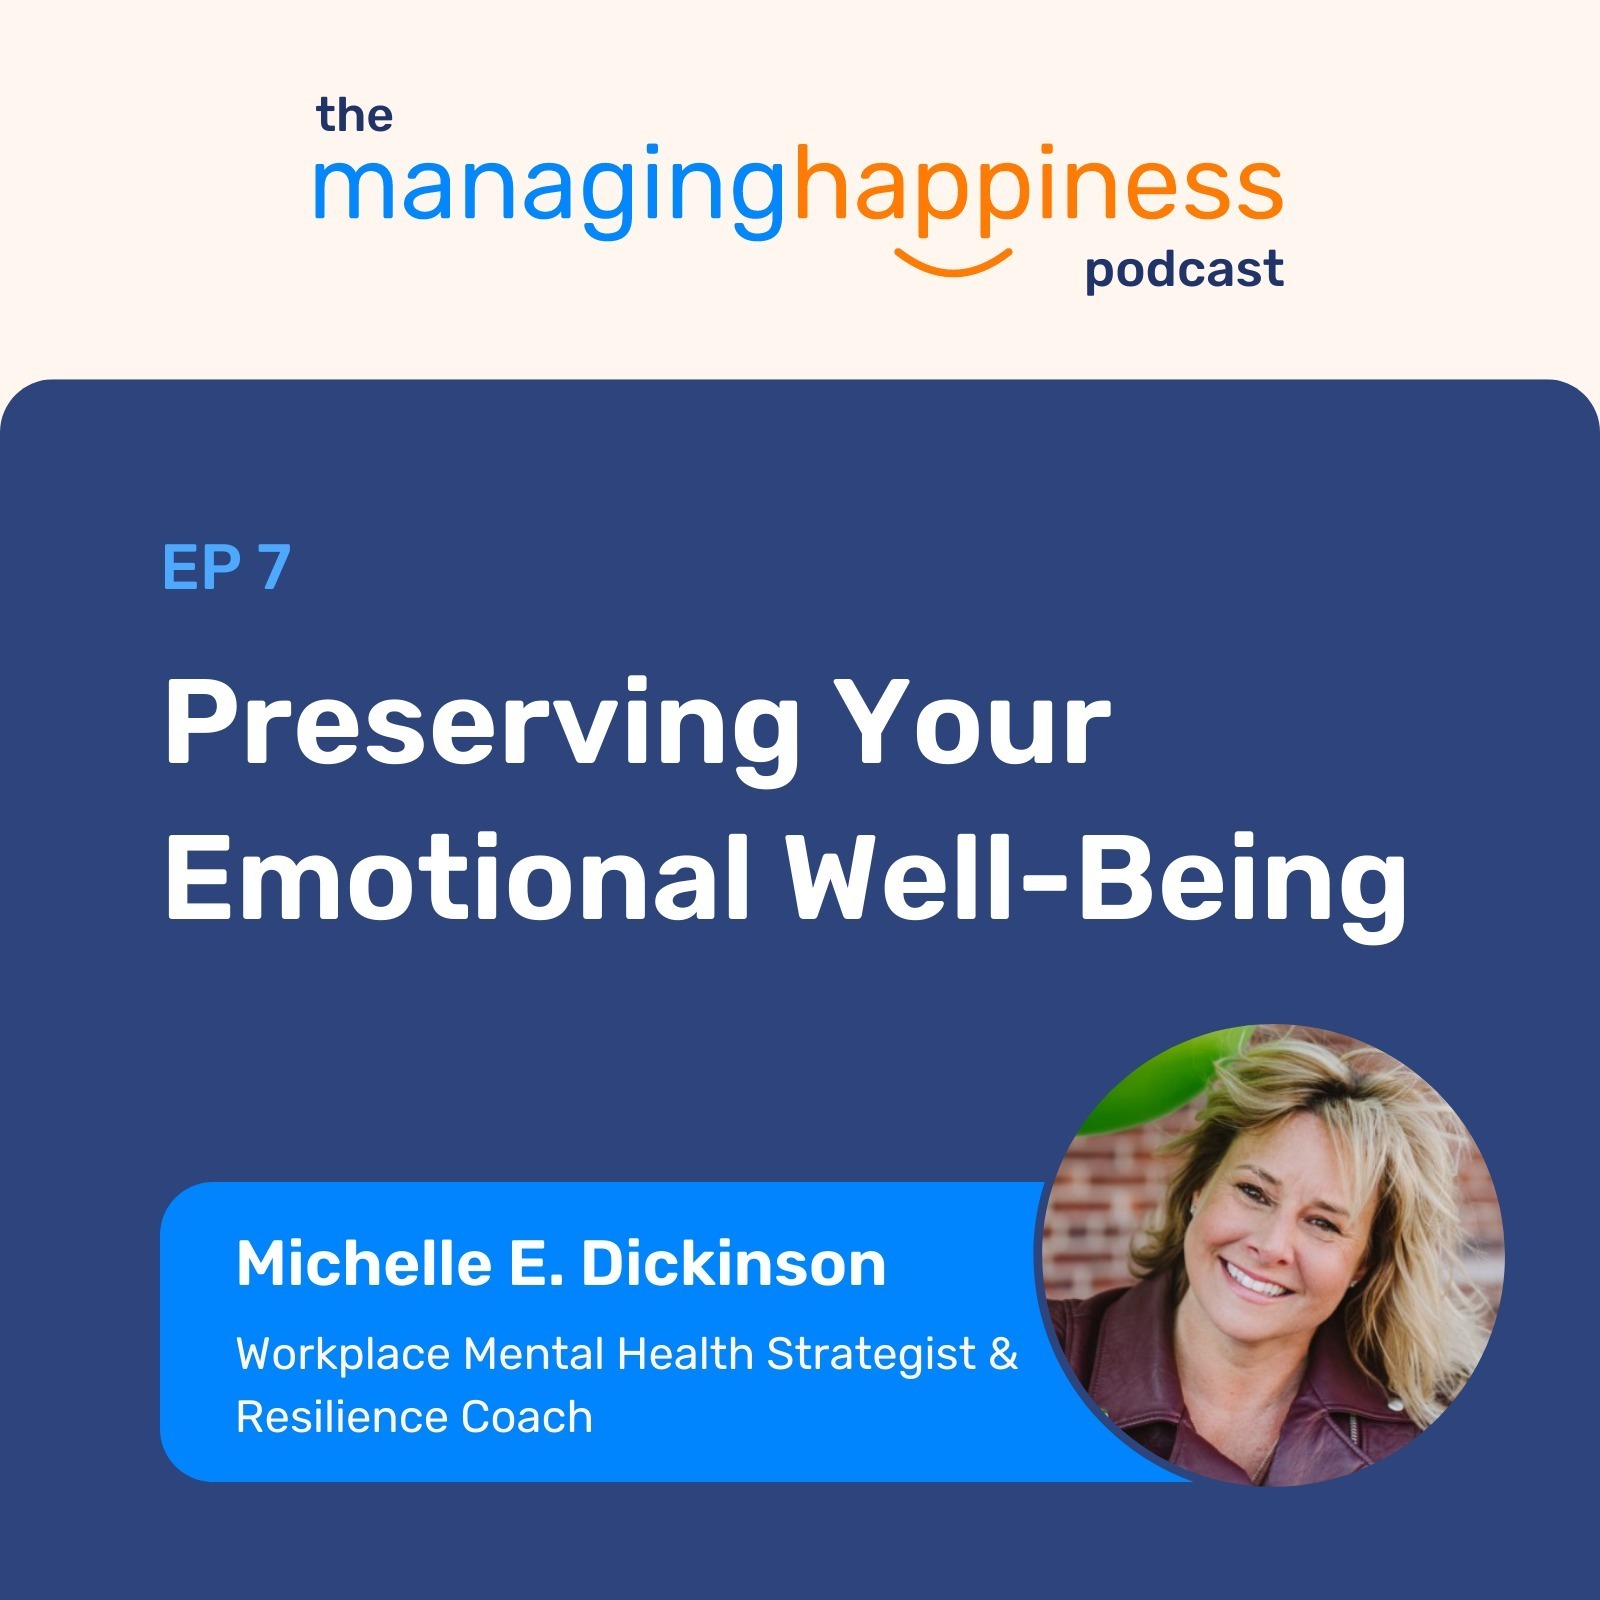 “Preserving Your Emotional Well-Being” with Michelle Dickinson